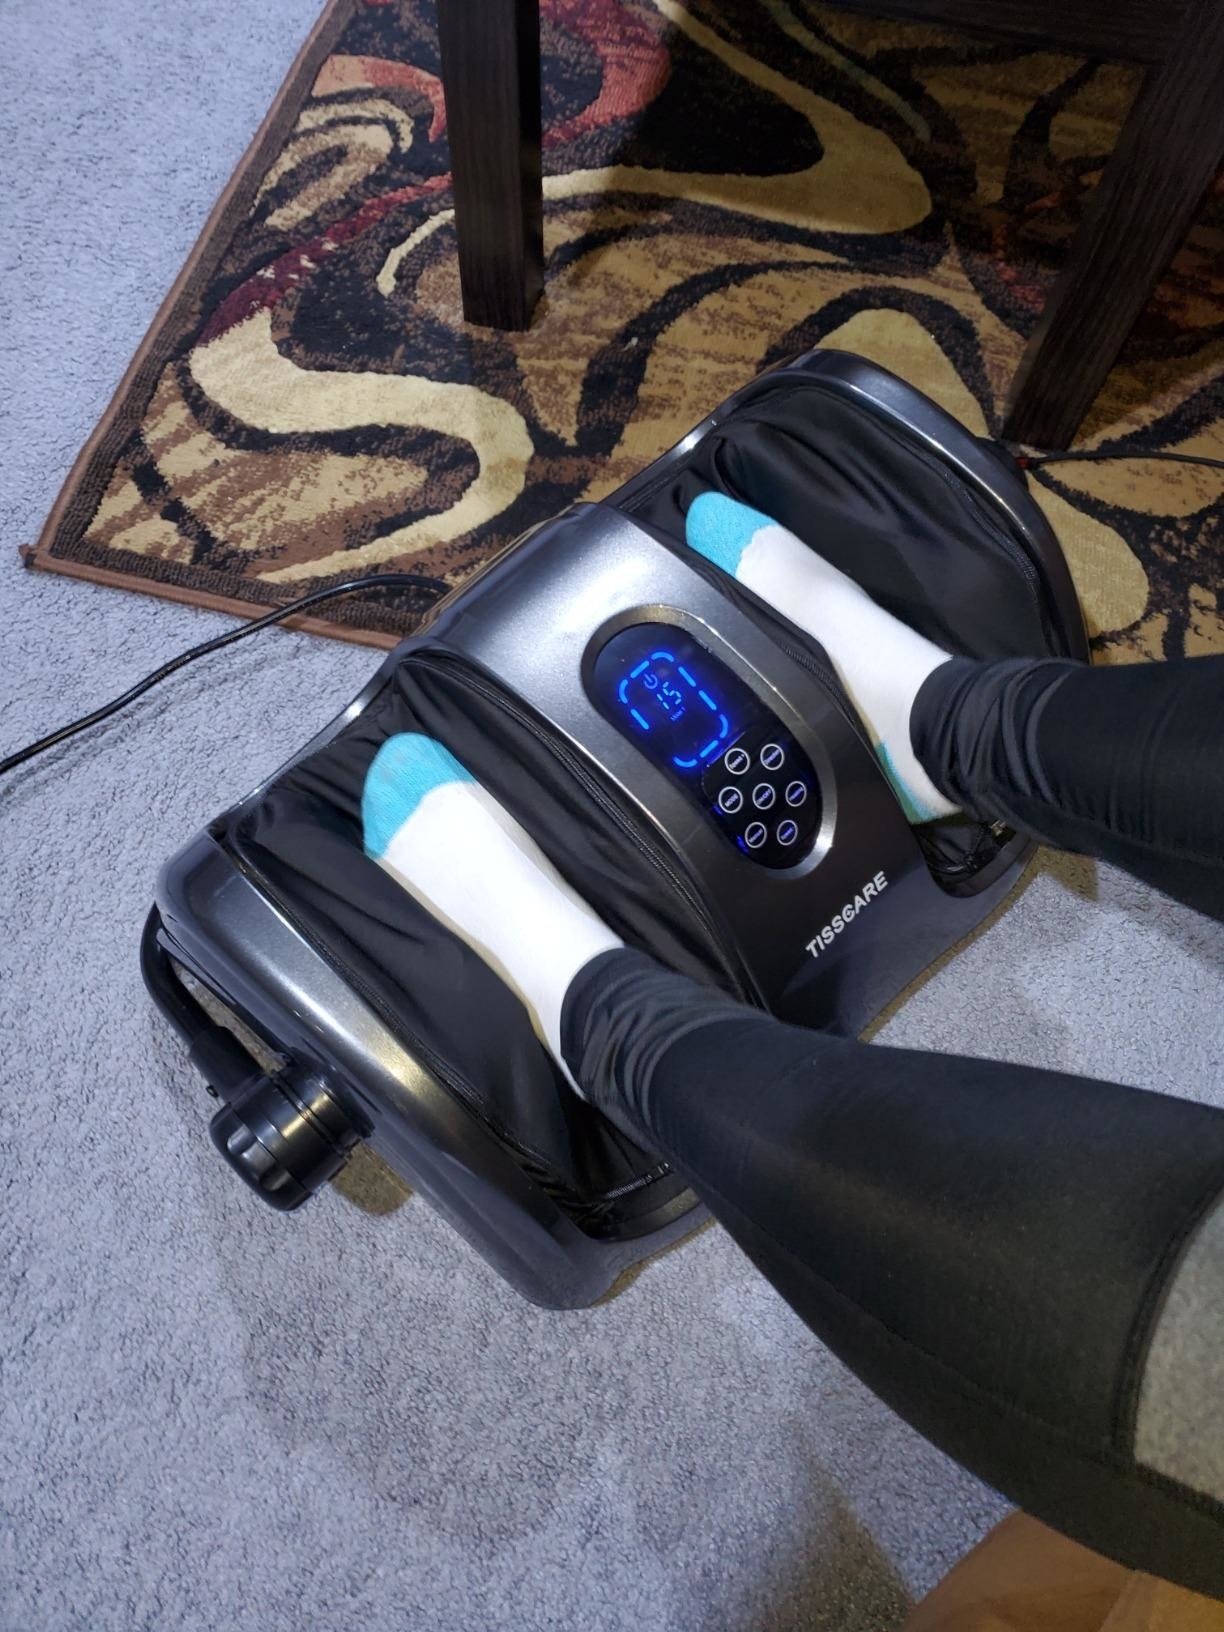 reviewer image of them using the foot massager